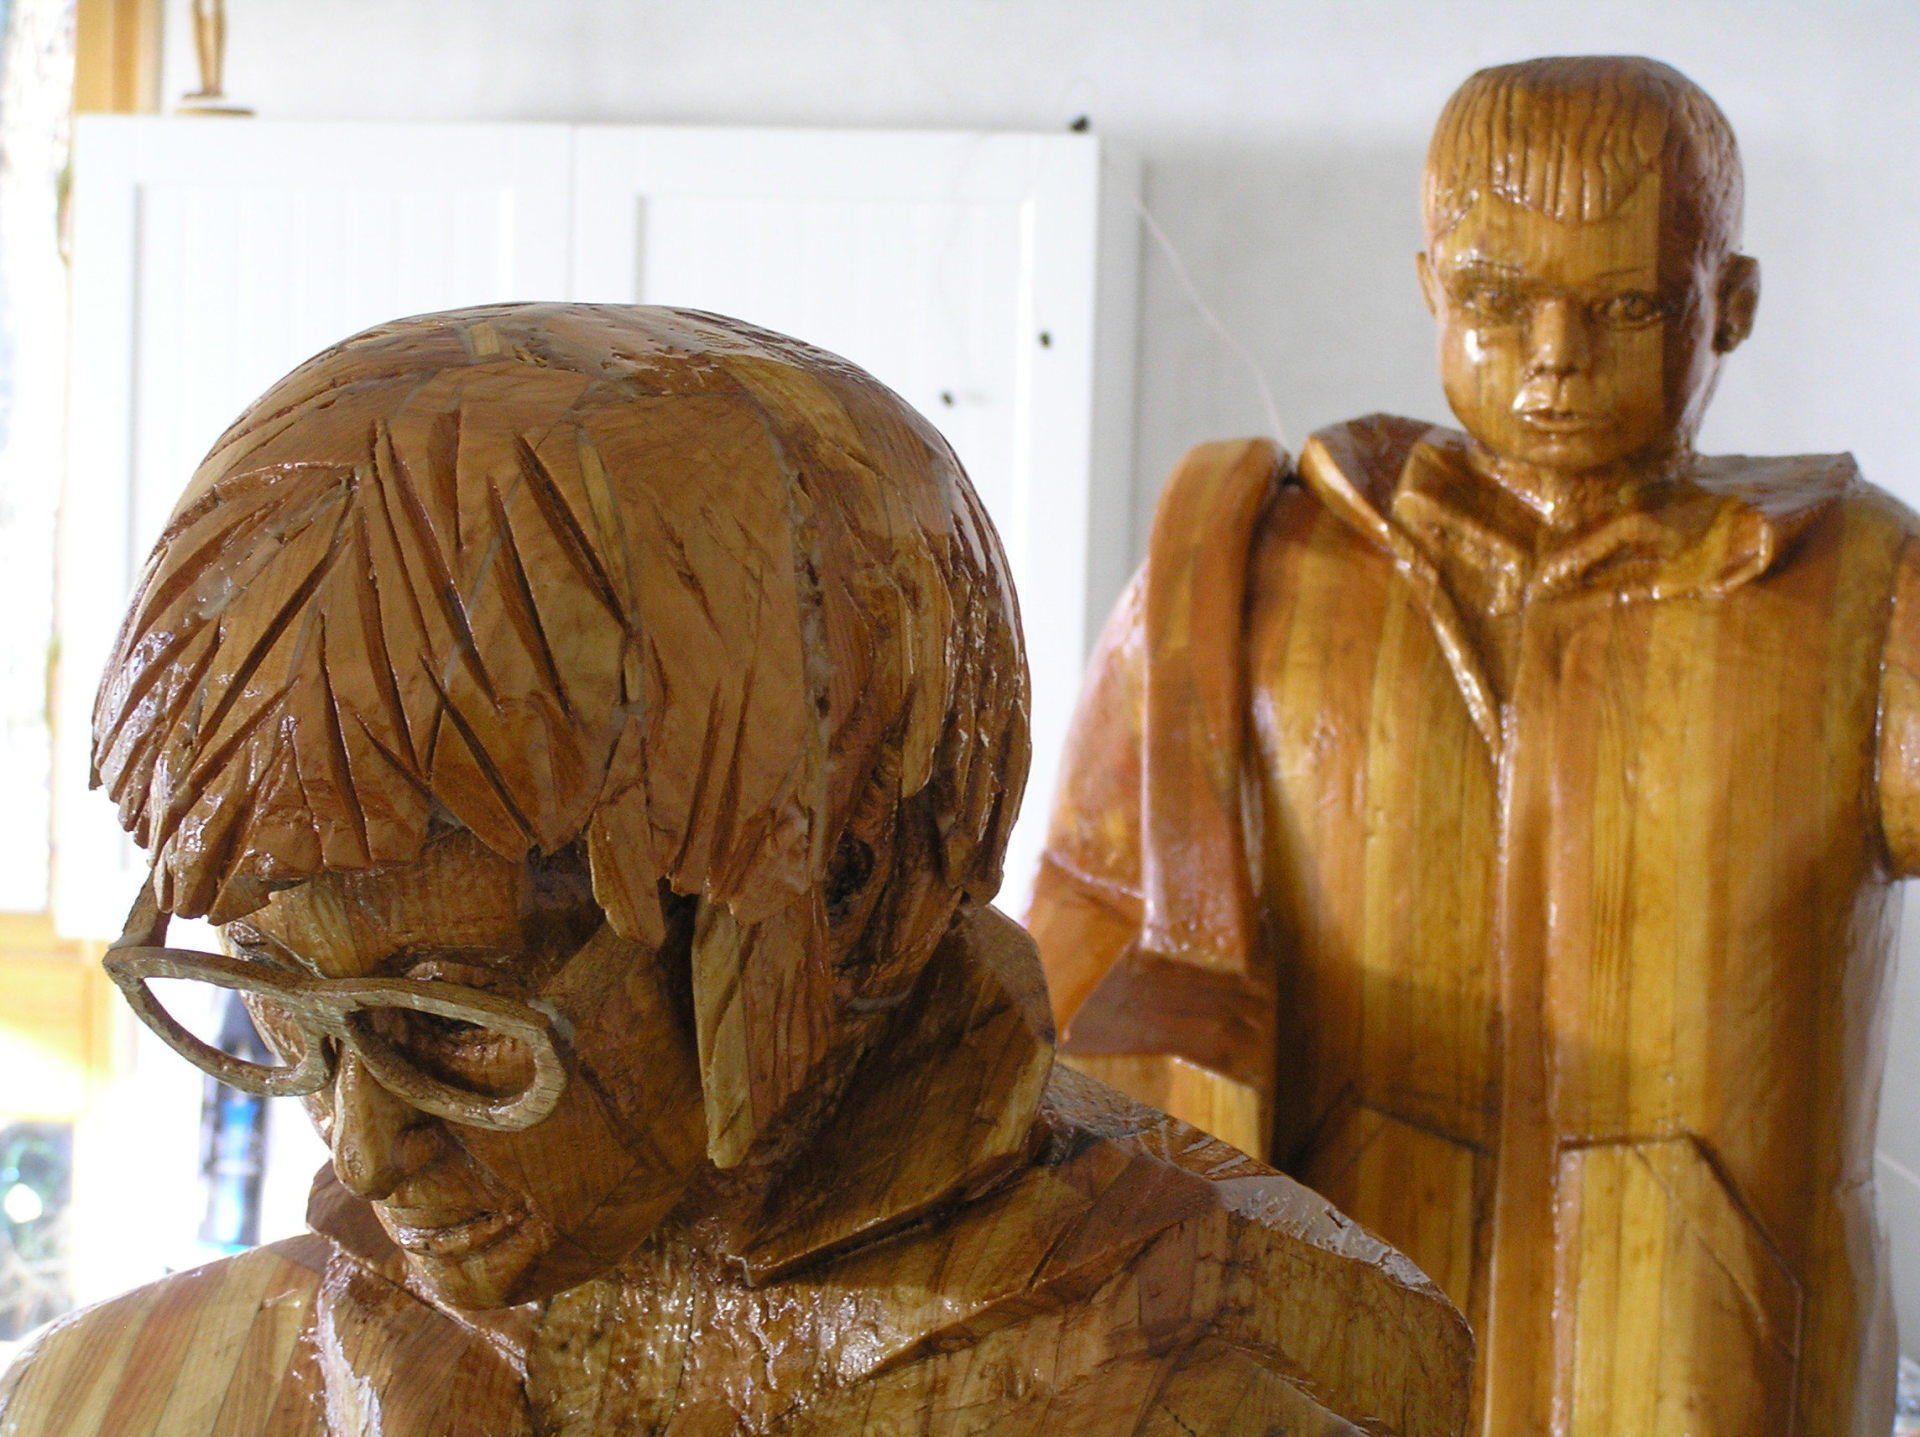 Contemporary wooden British figurative sculpture made by Ingrained Culture.